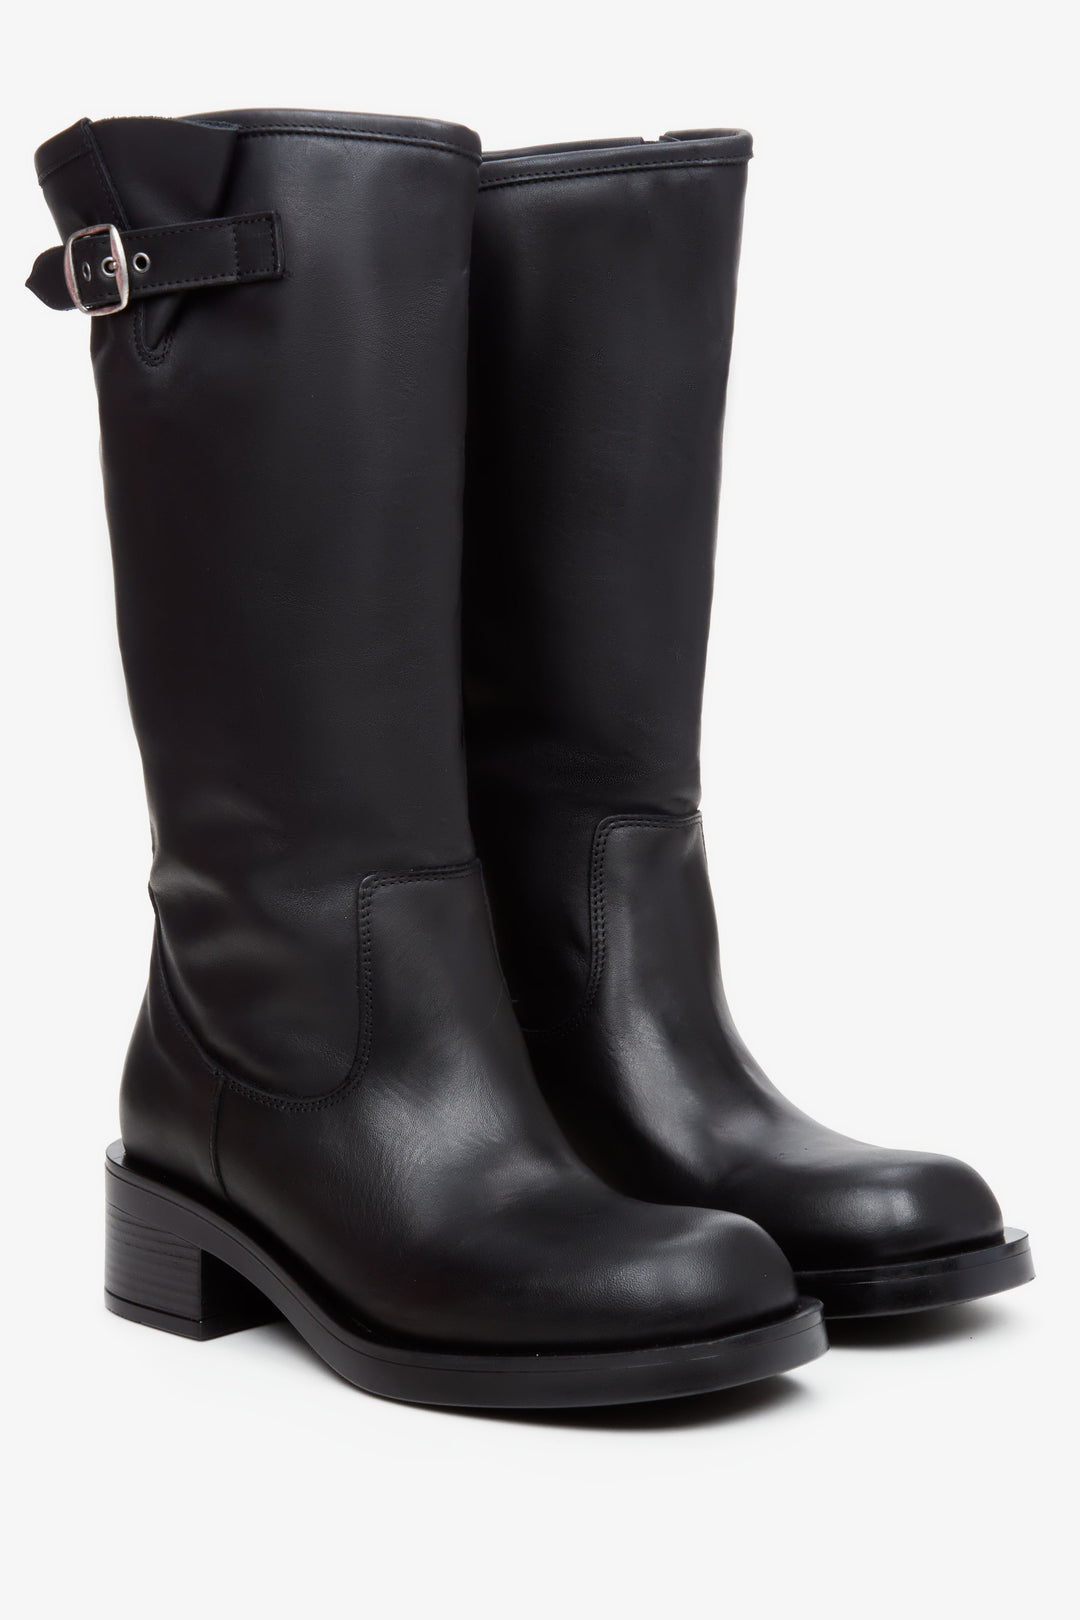 Women's black leather ankle boots by Estro.